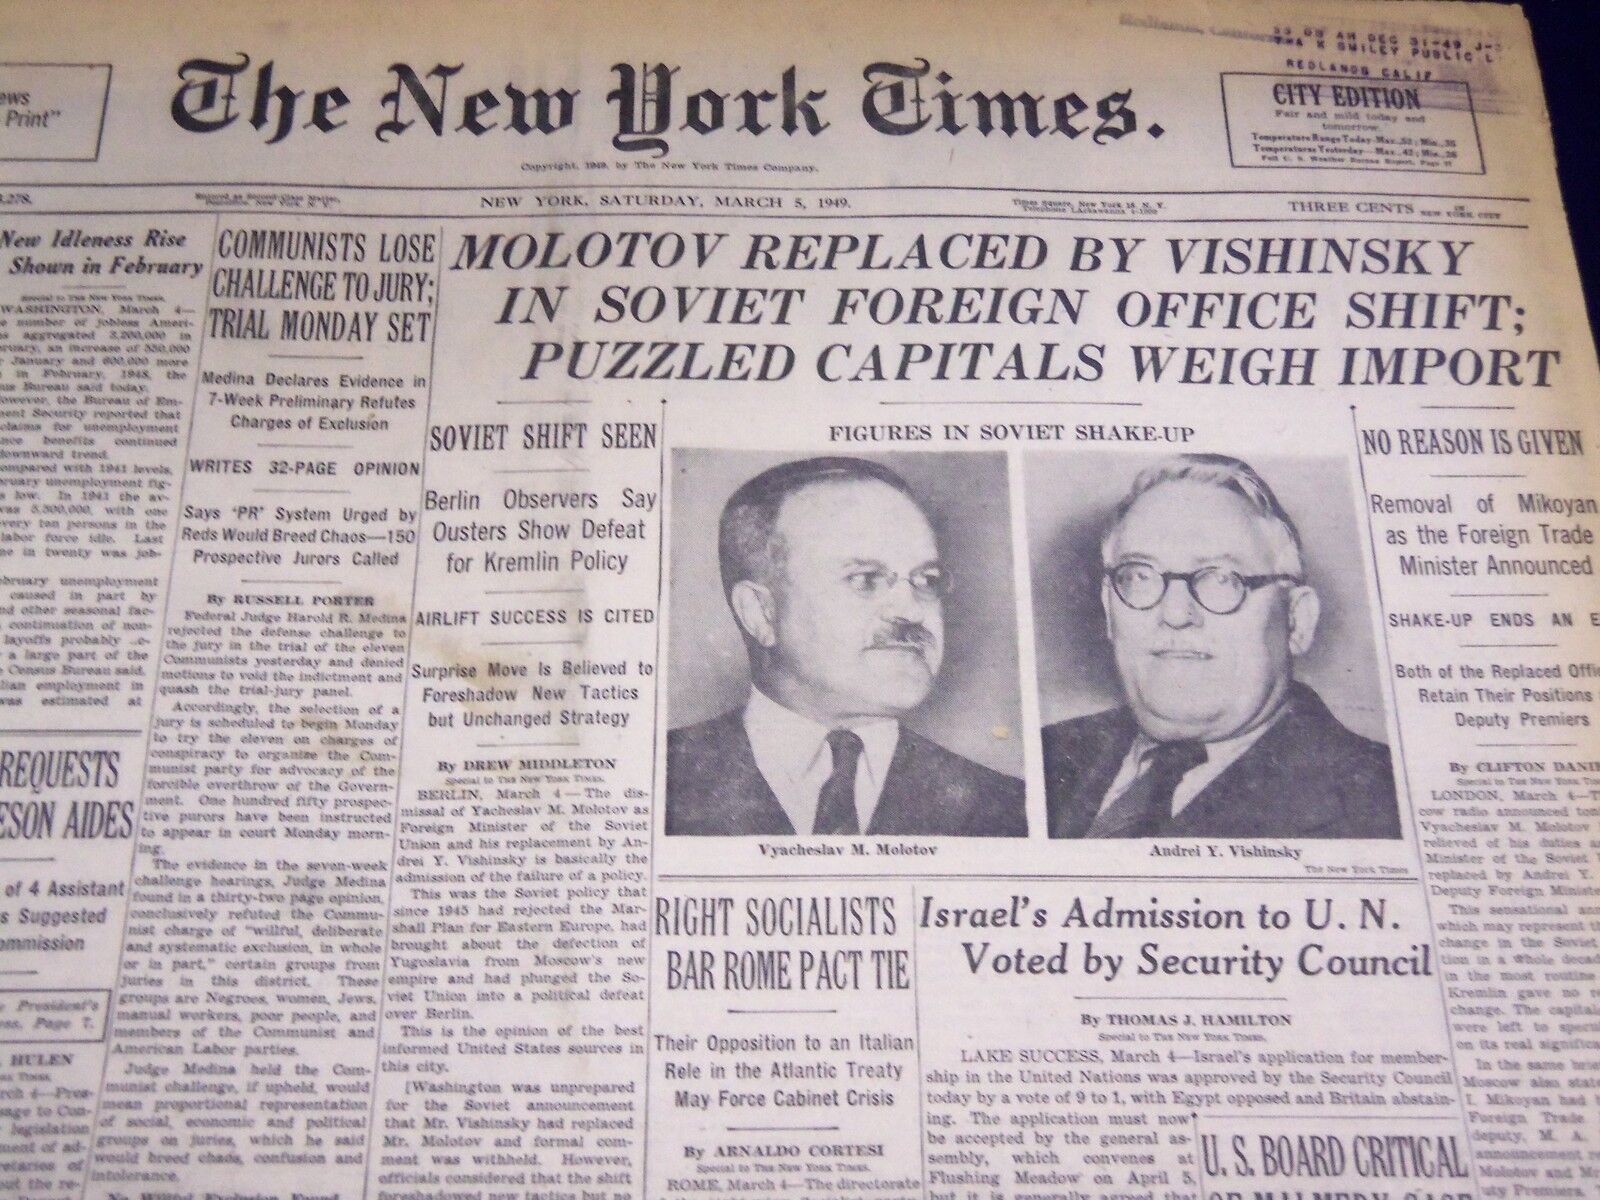 1949 MARCH 5 NEW YORK TIMES - MOLOTOV REPLACED BY VISHINSKY - NT 3217